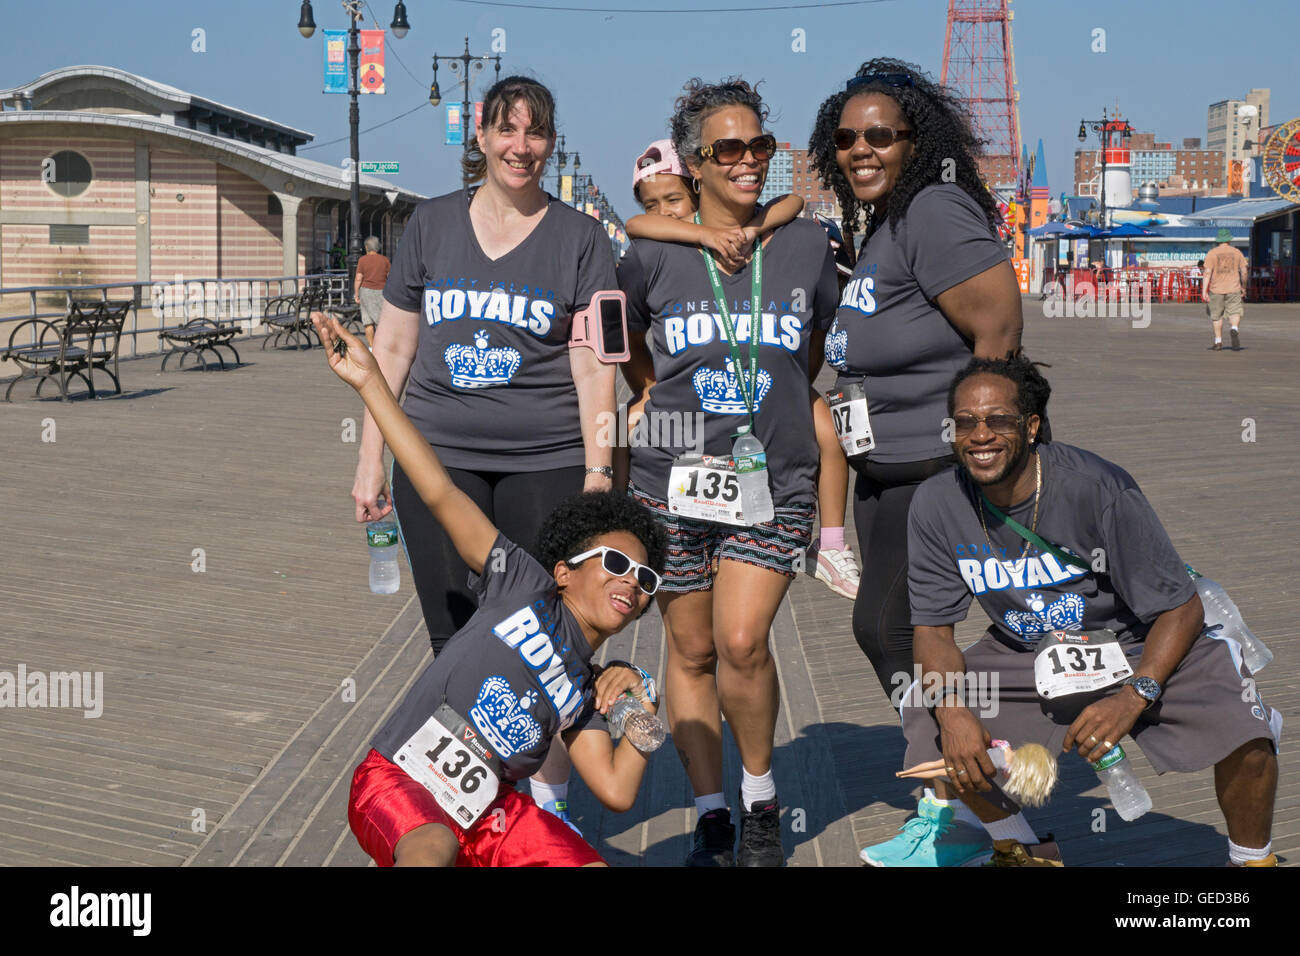 Men & women from a book club in New Jersey pose for a photo during the Brooklyn Cyclones 5k race in Coney Island, Brooklyn, NYC Stock Photo